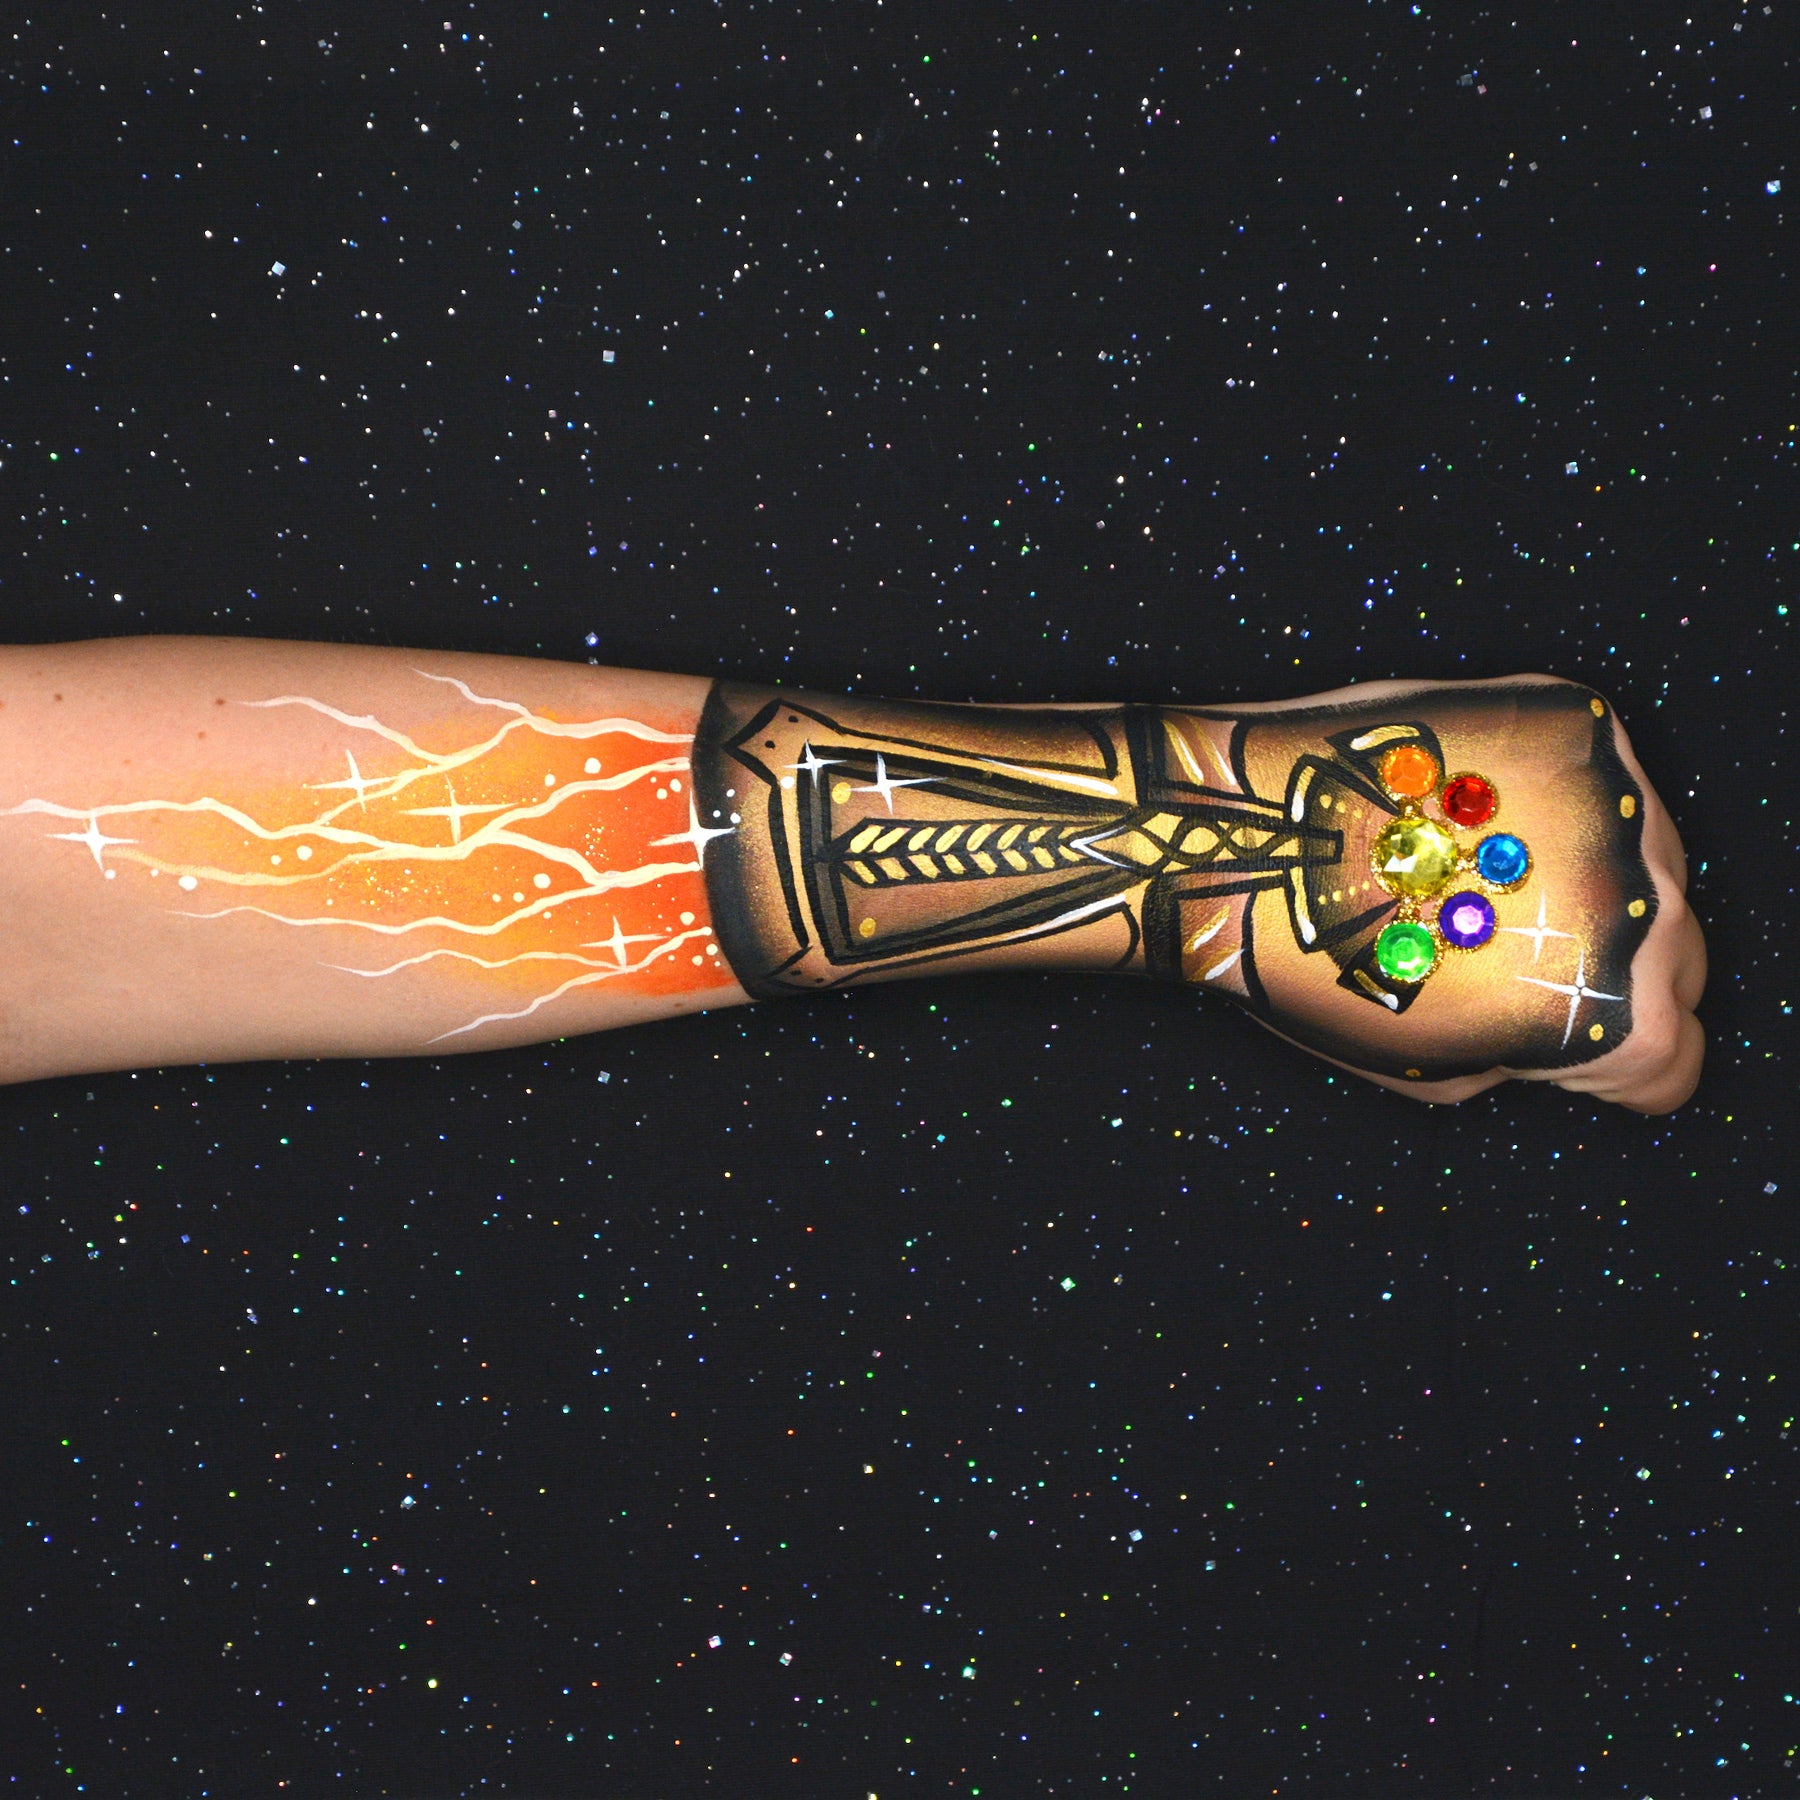 Infinity Stones Arm Design Inspired by “Avengers: Infinity War” Movie